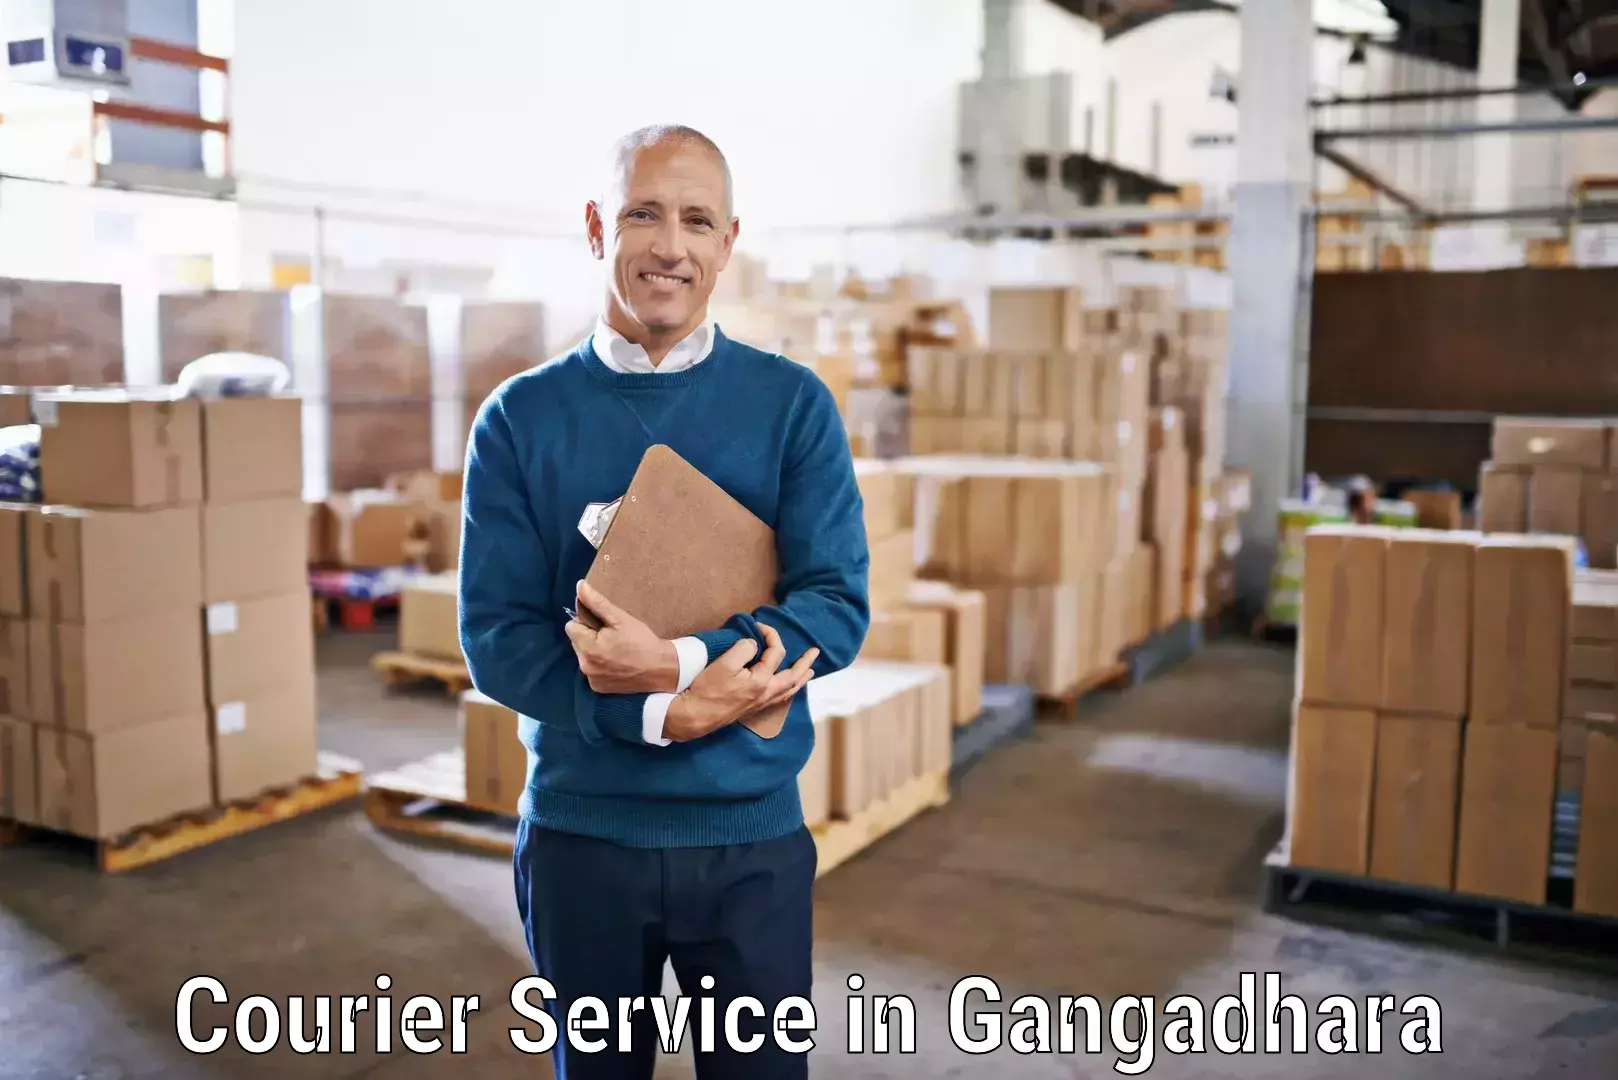 Overnight delivery services in Gangadhara